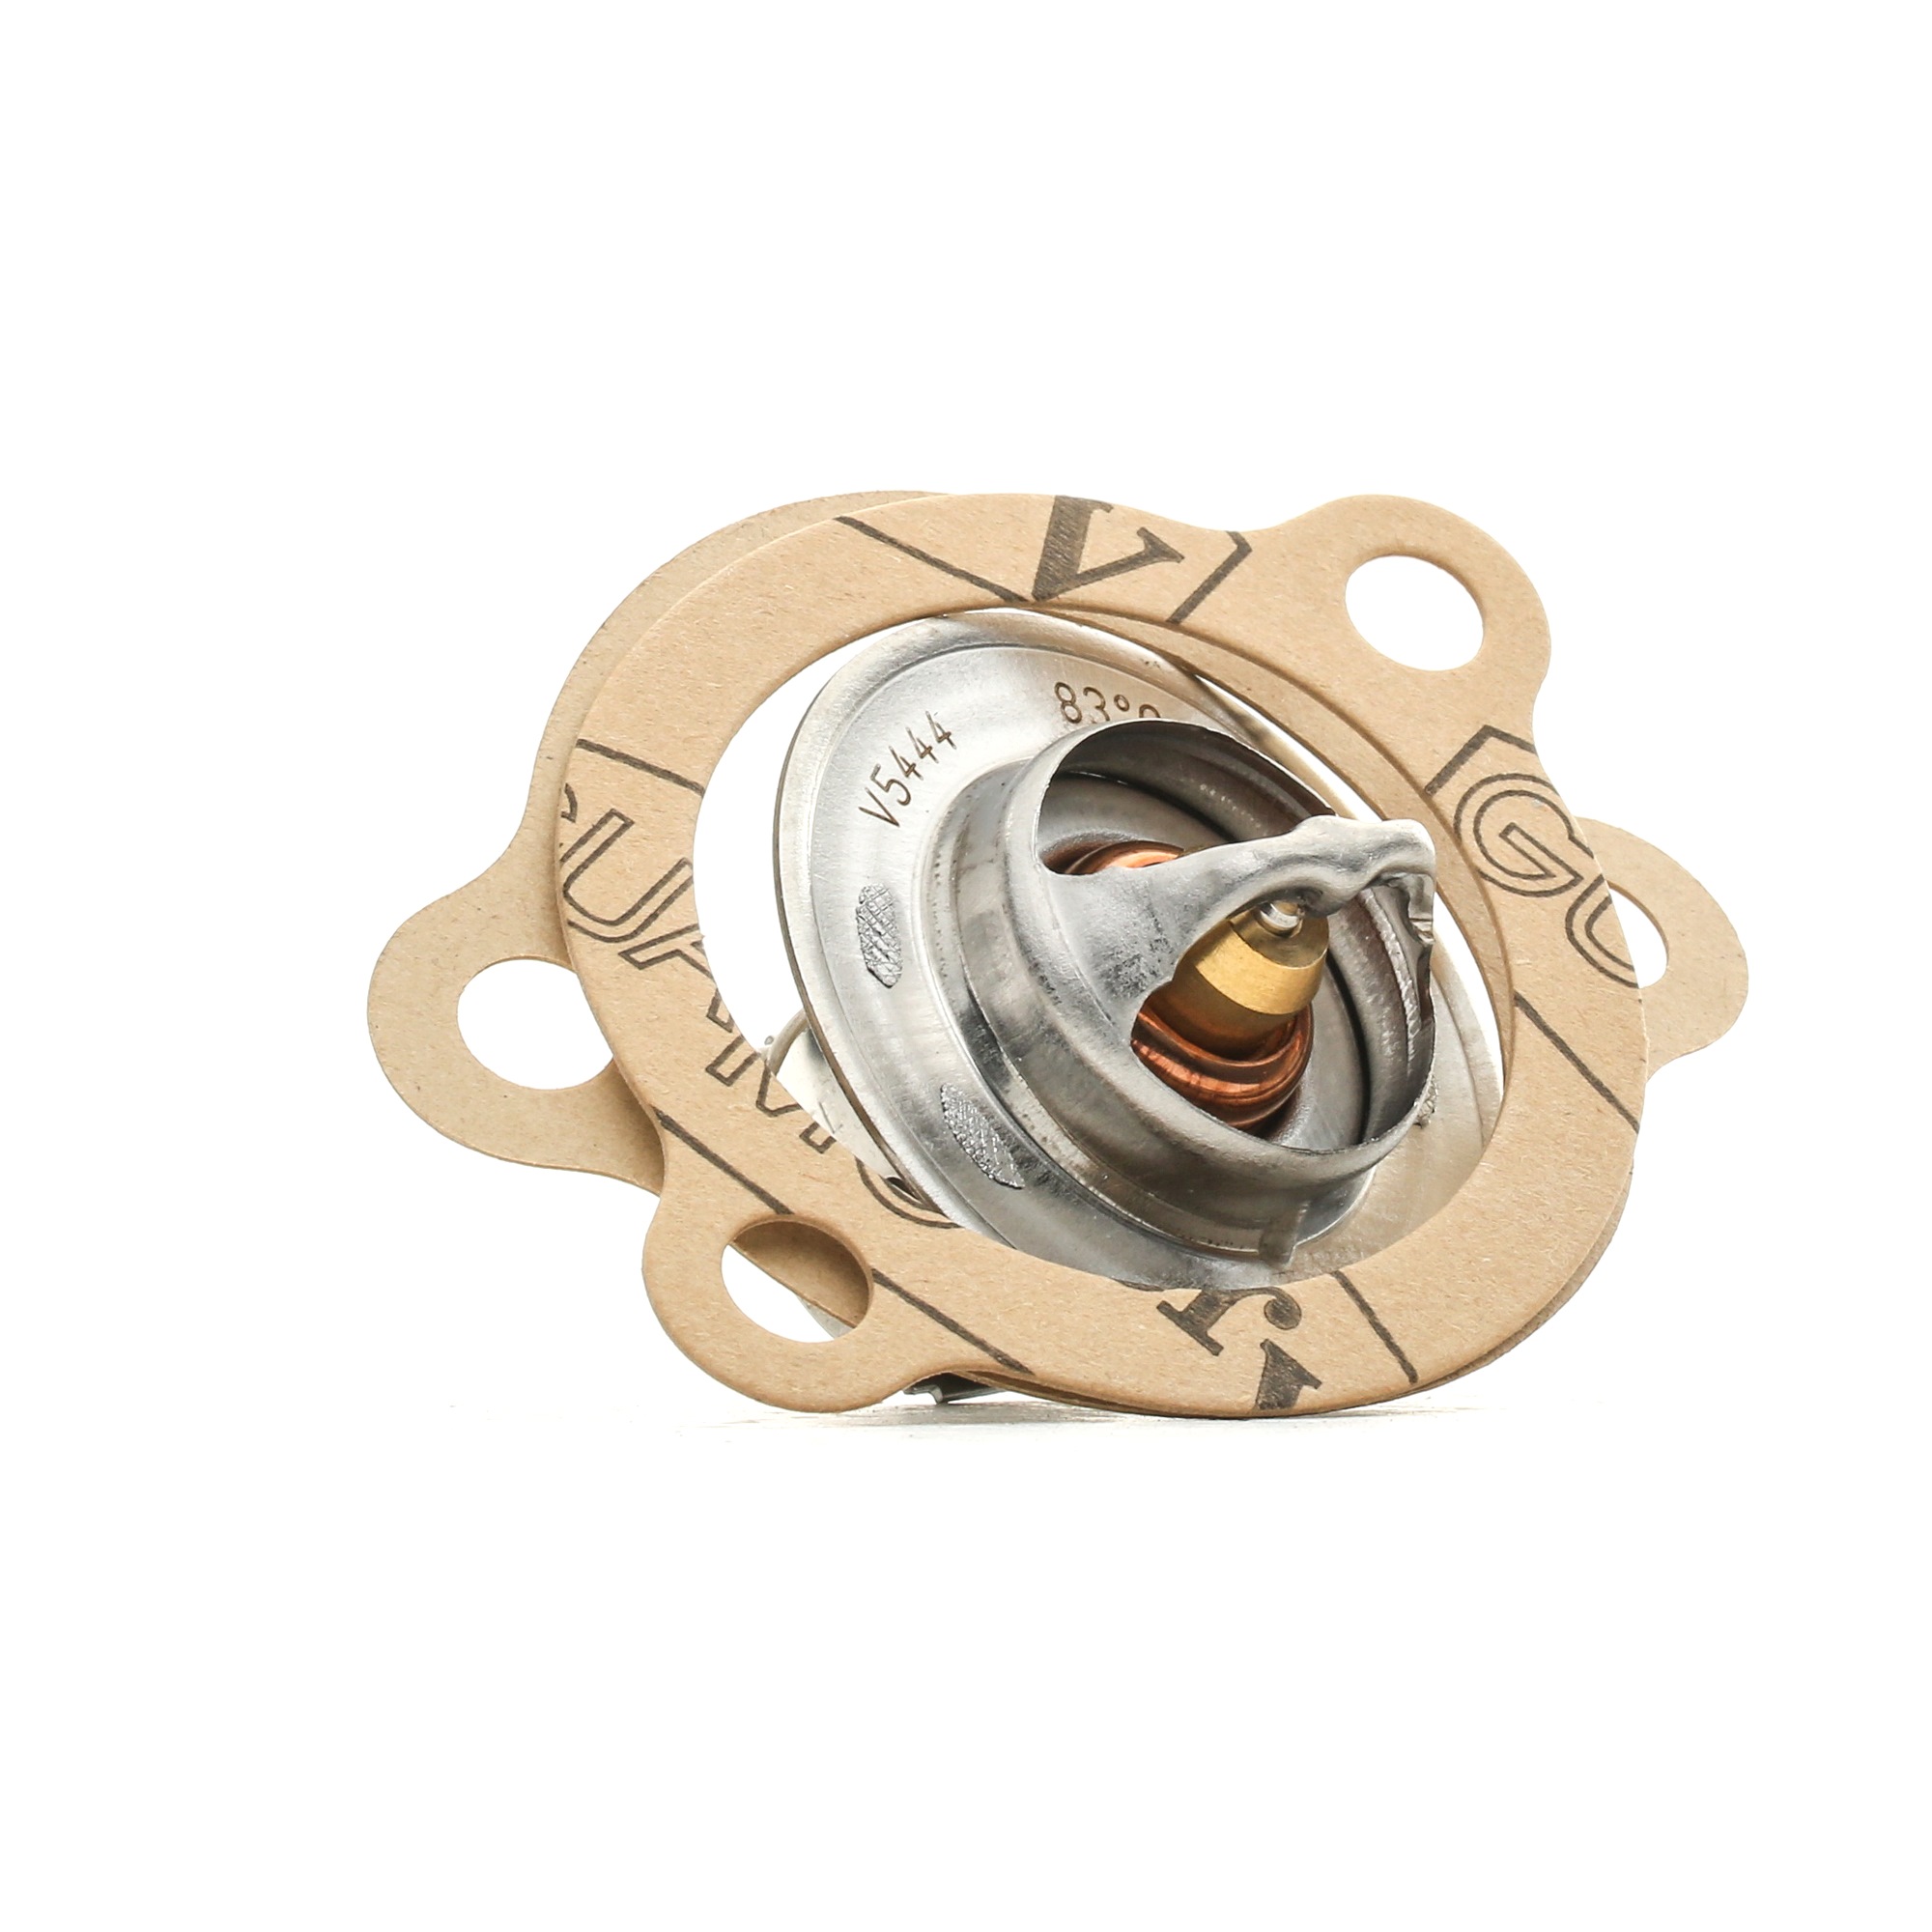 Carry VII Minibus (0S) Cooling system parts - Engine thermostat CALORSTAT by Vernet TH1416.82J